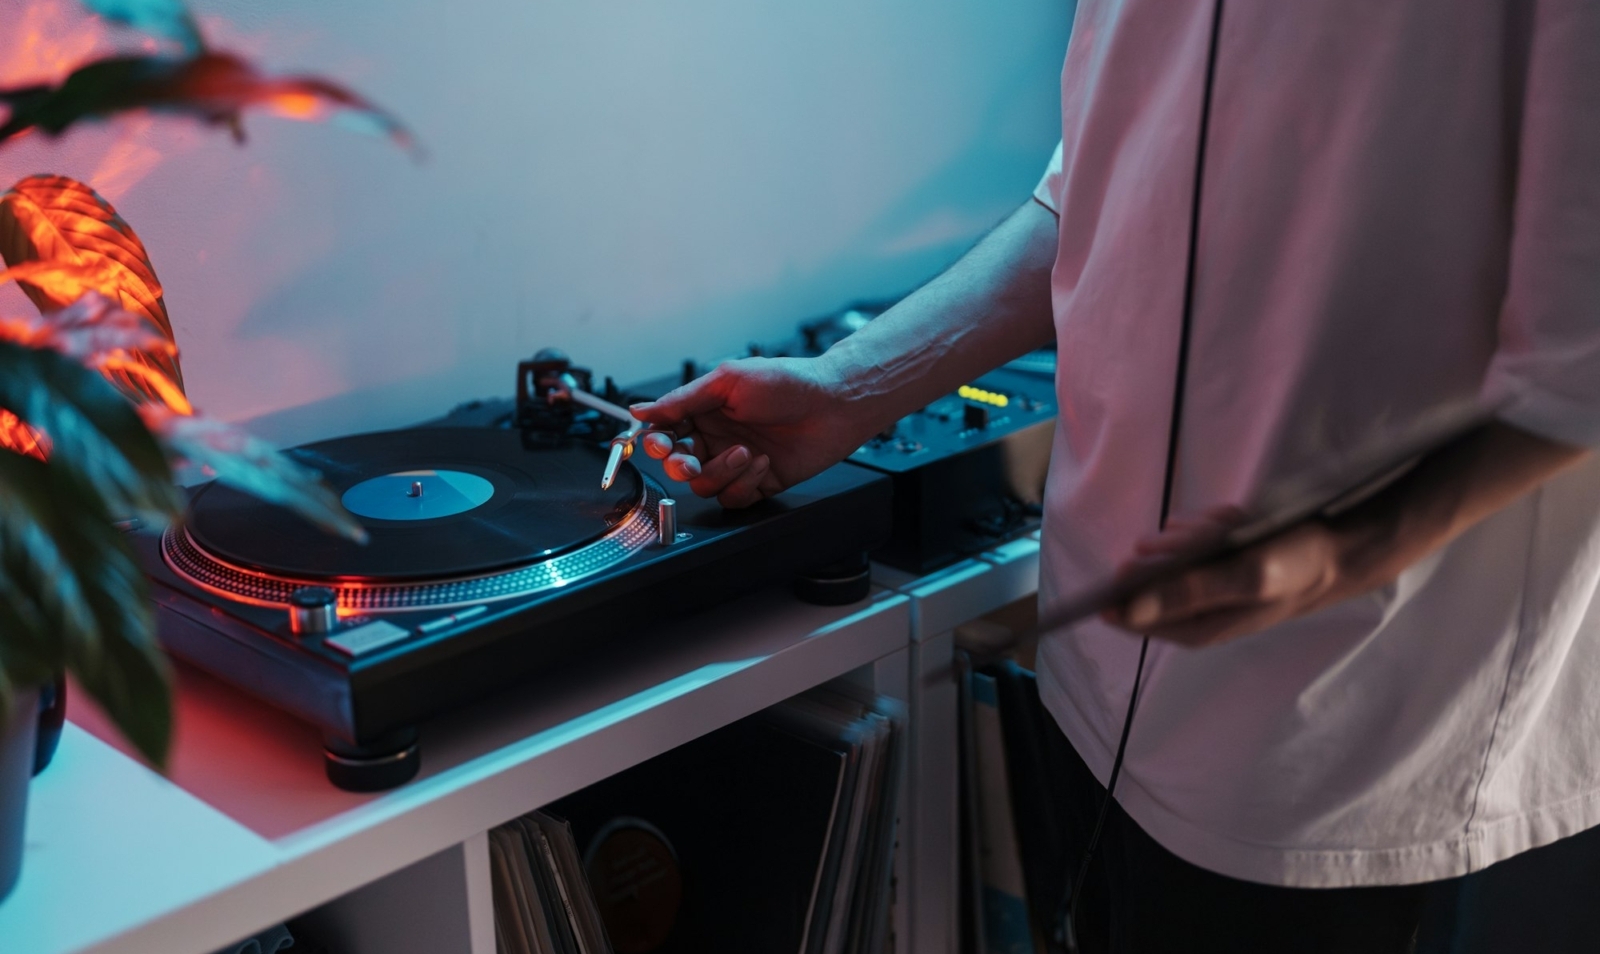 Dj mixing music on turntable in a home studio at night